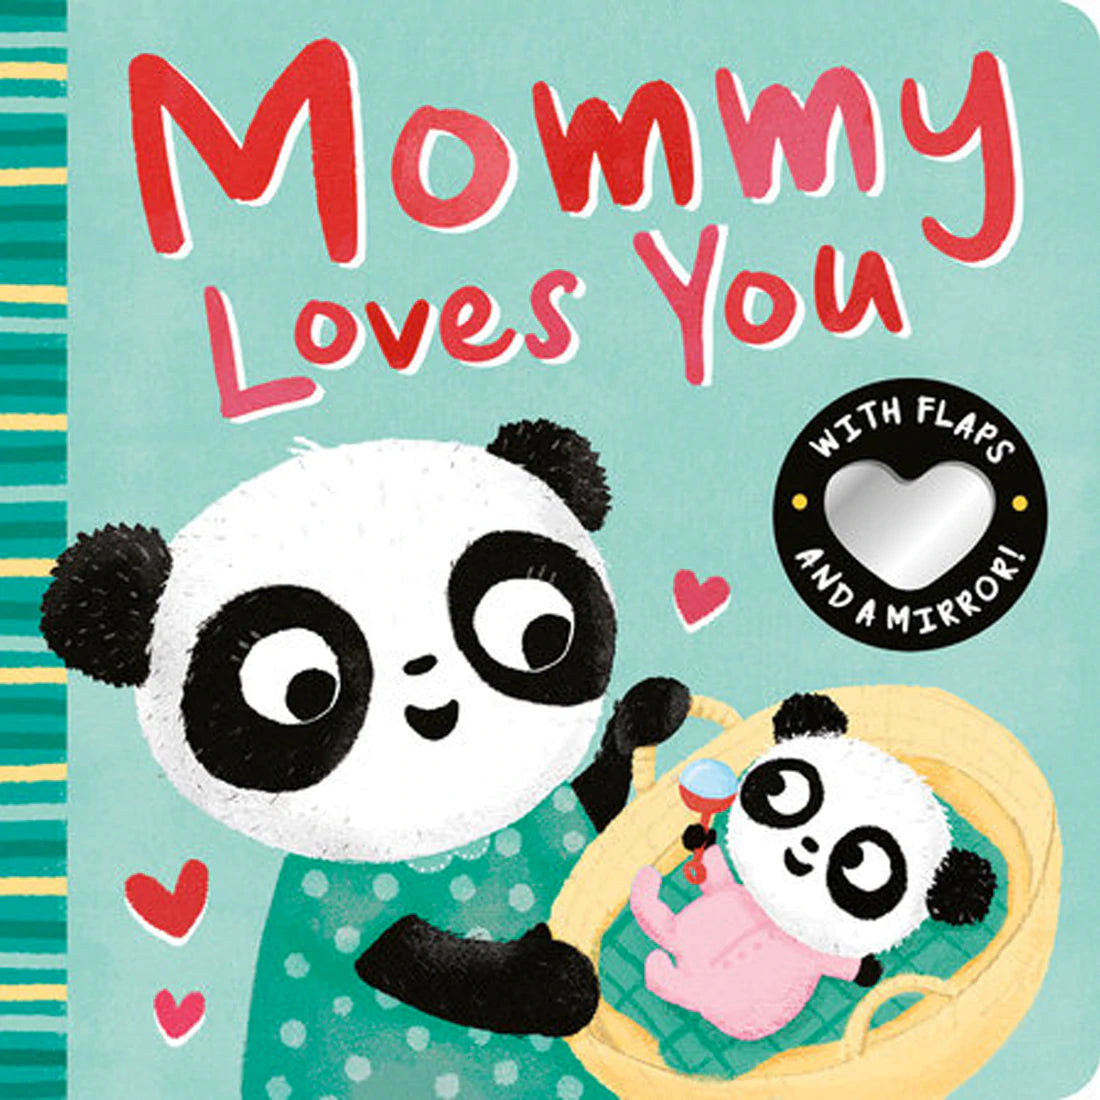 Mommy Loves You board book